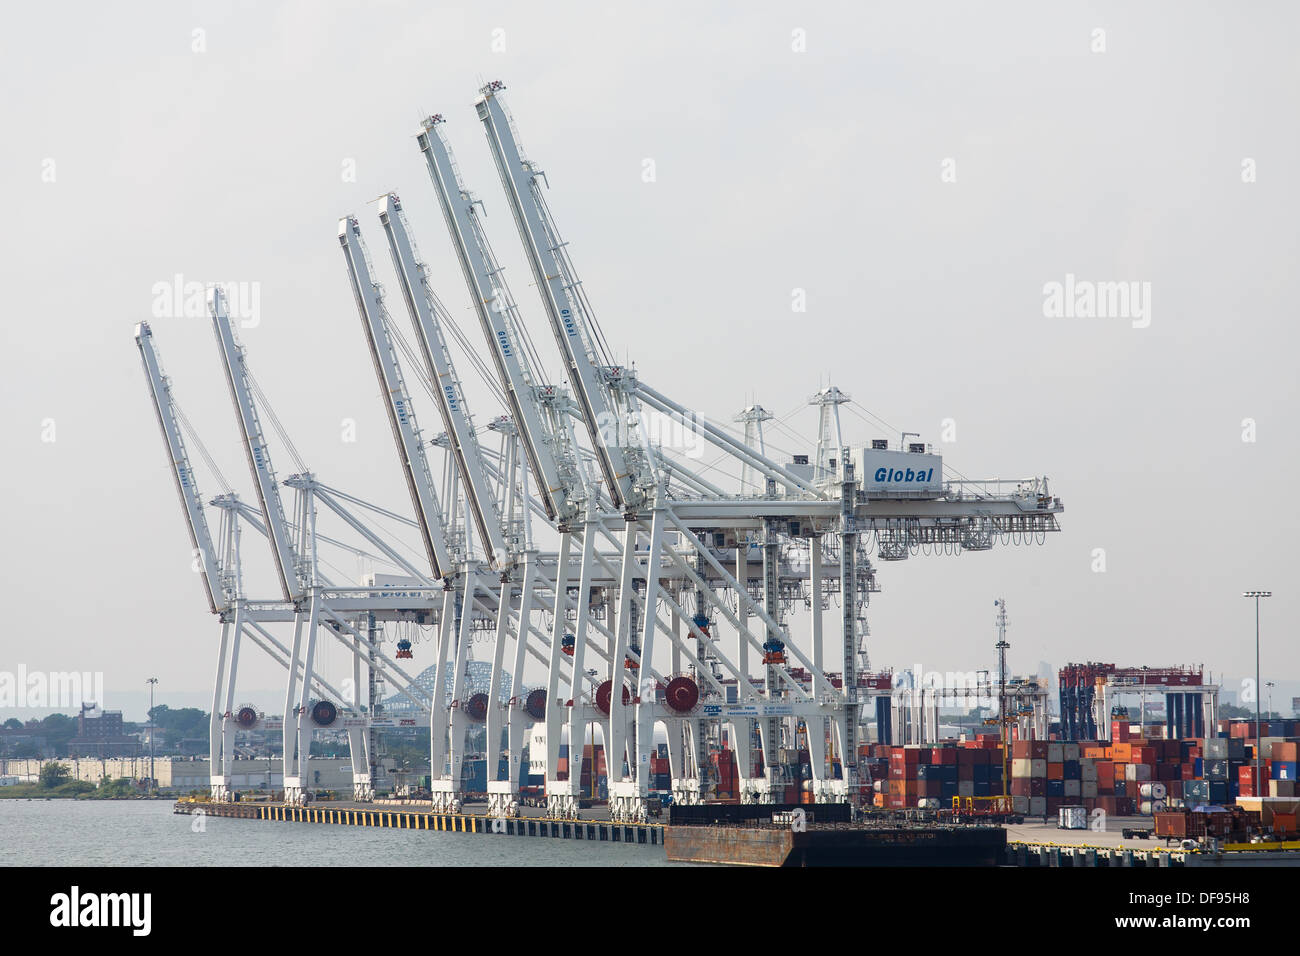 Shipping cranes and containers at a heavy, industrial shipping port Stock Photo